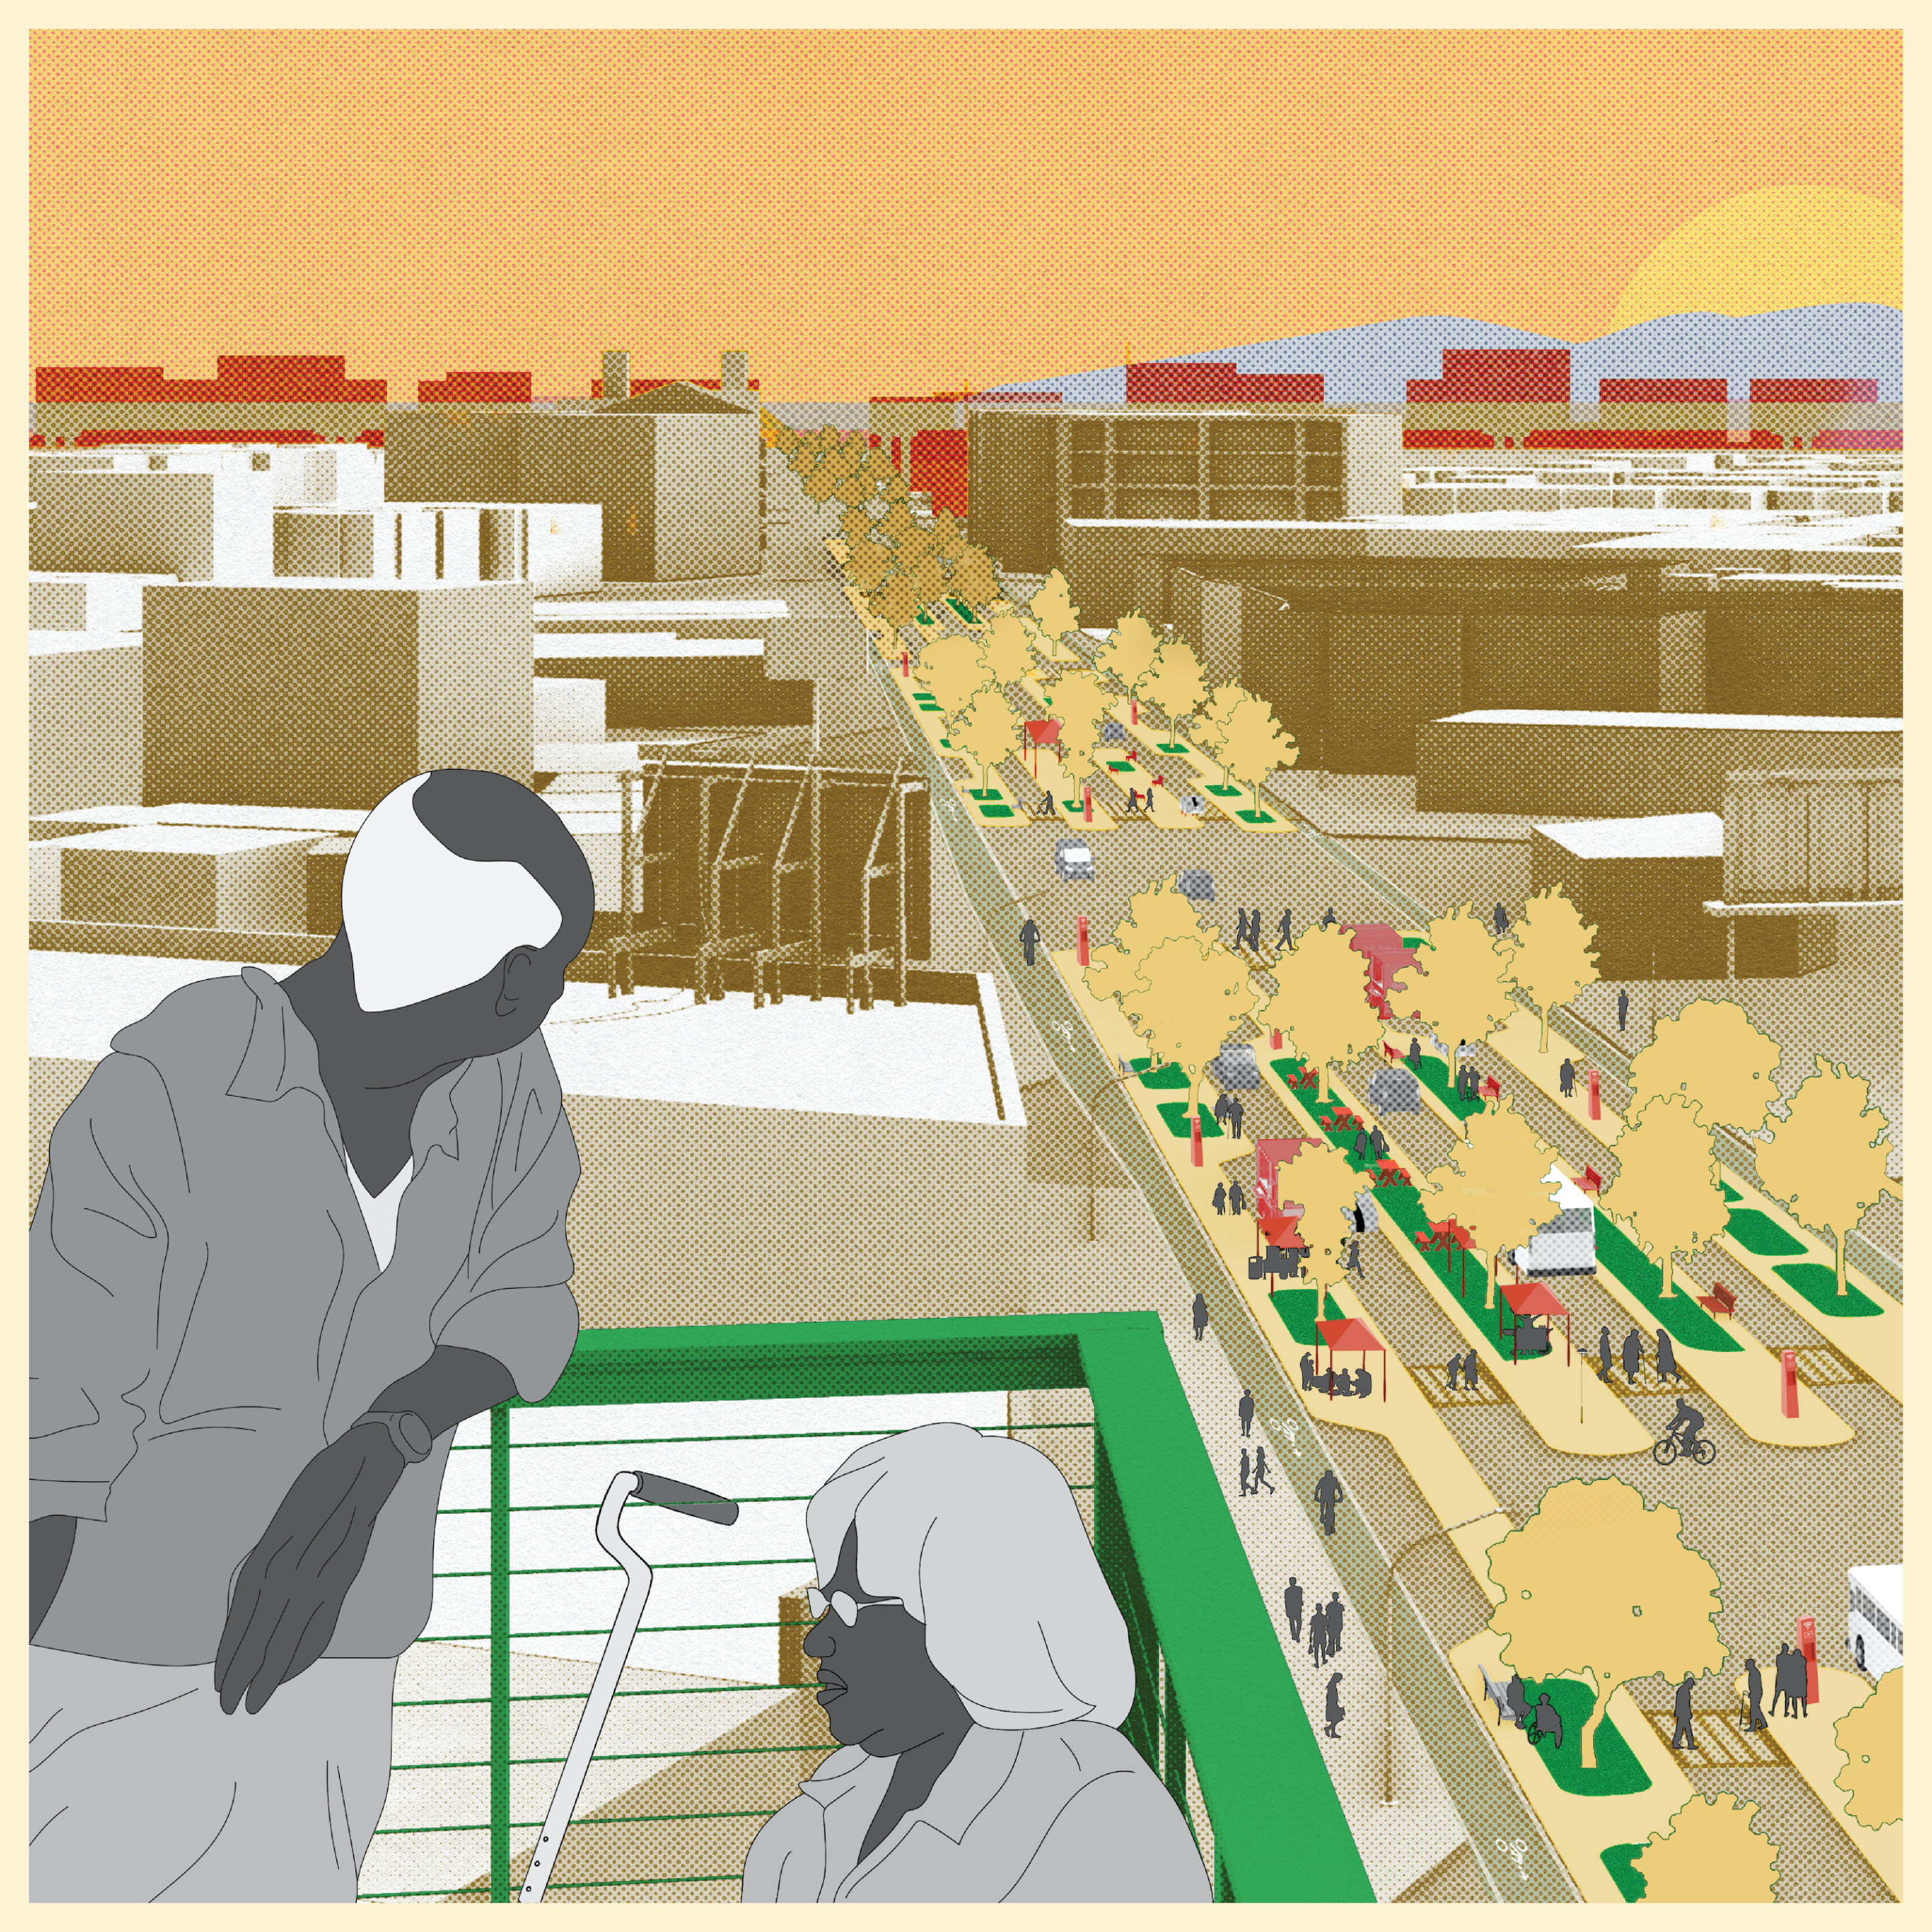 illustration of elderly people socializing on a roofdeck overlooking a city